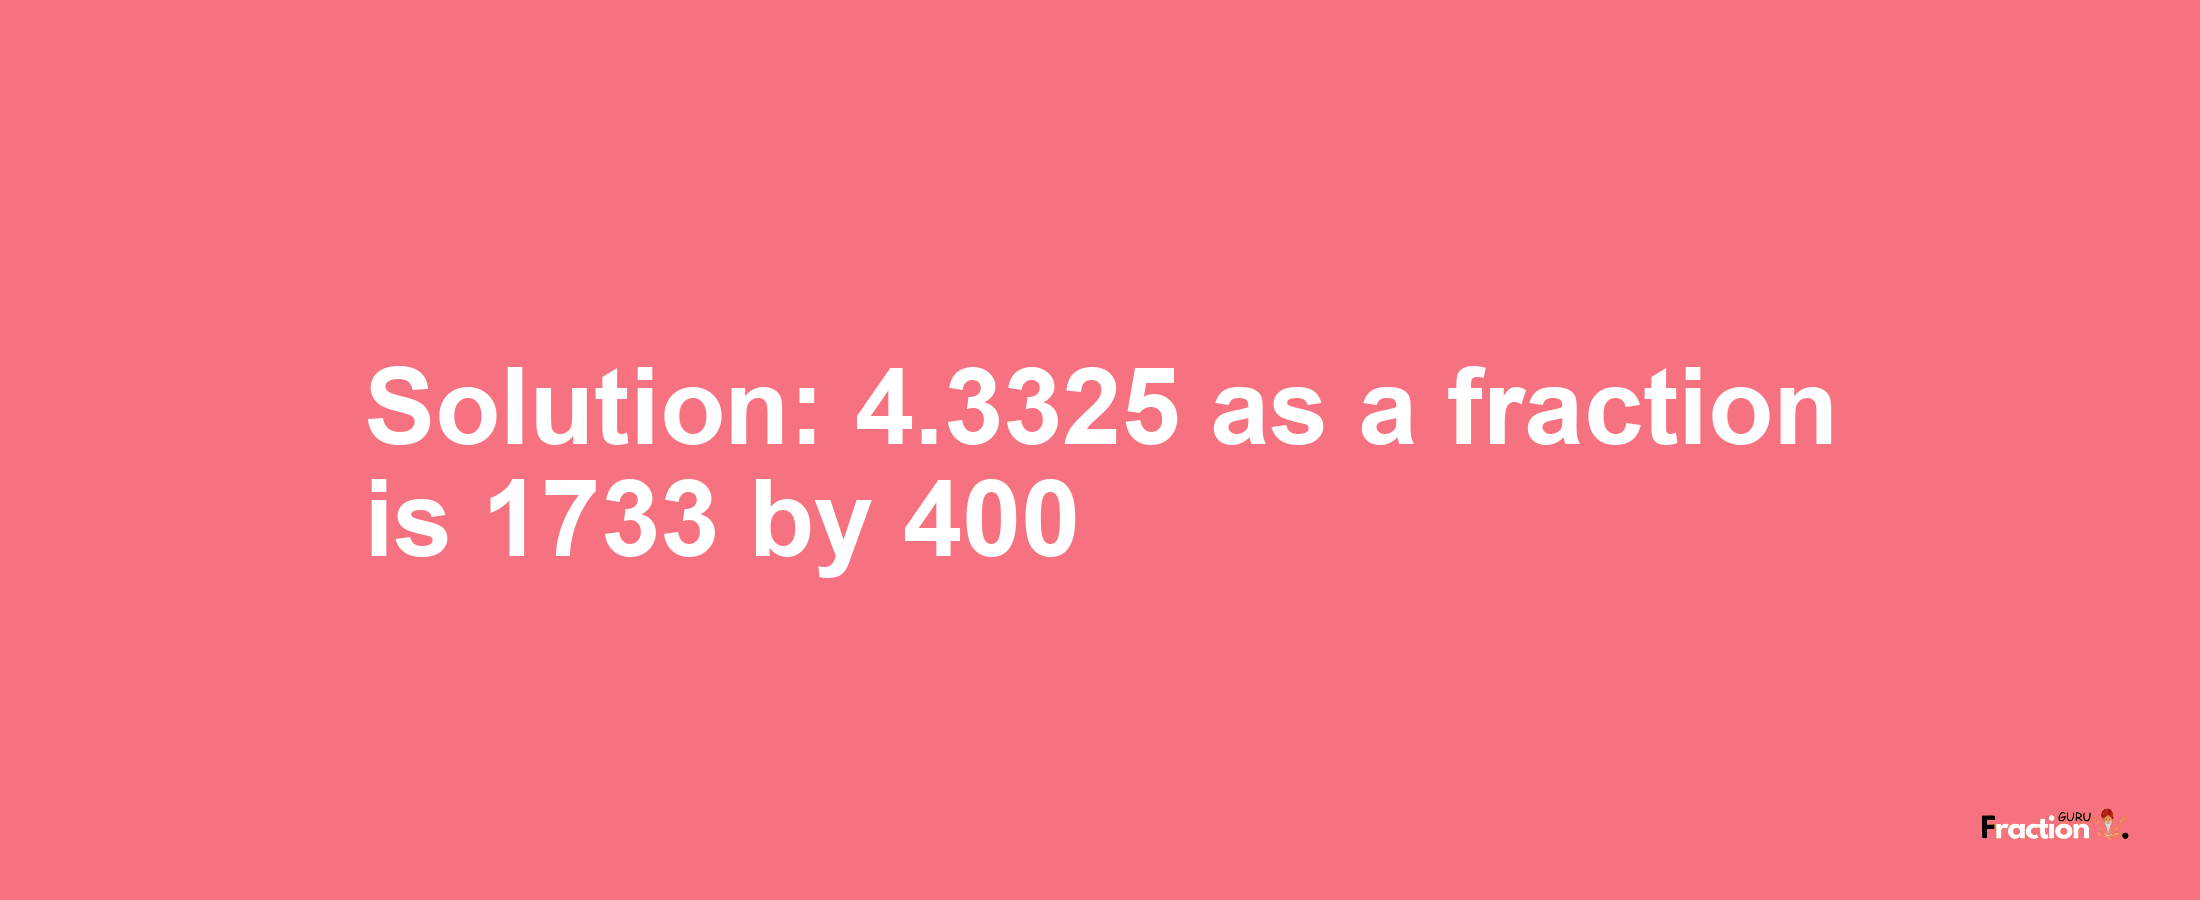 Solution:4.3325 as a fraction is 1733/400